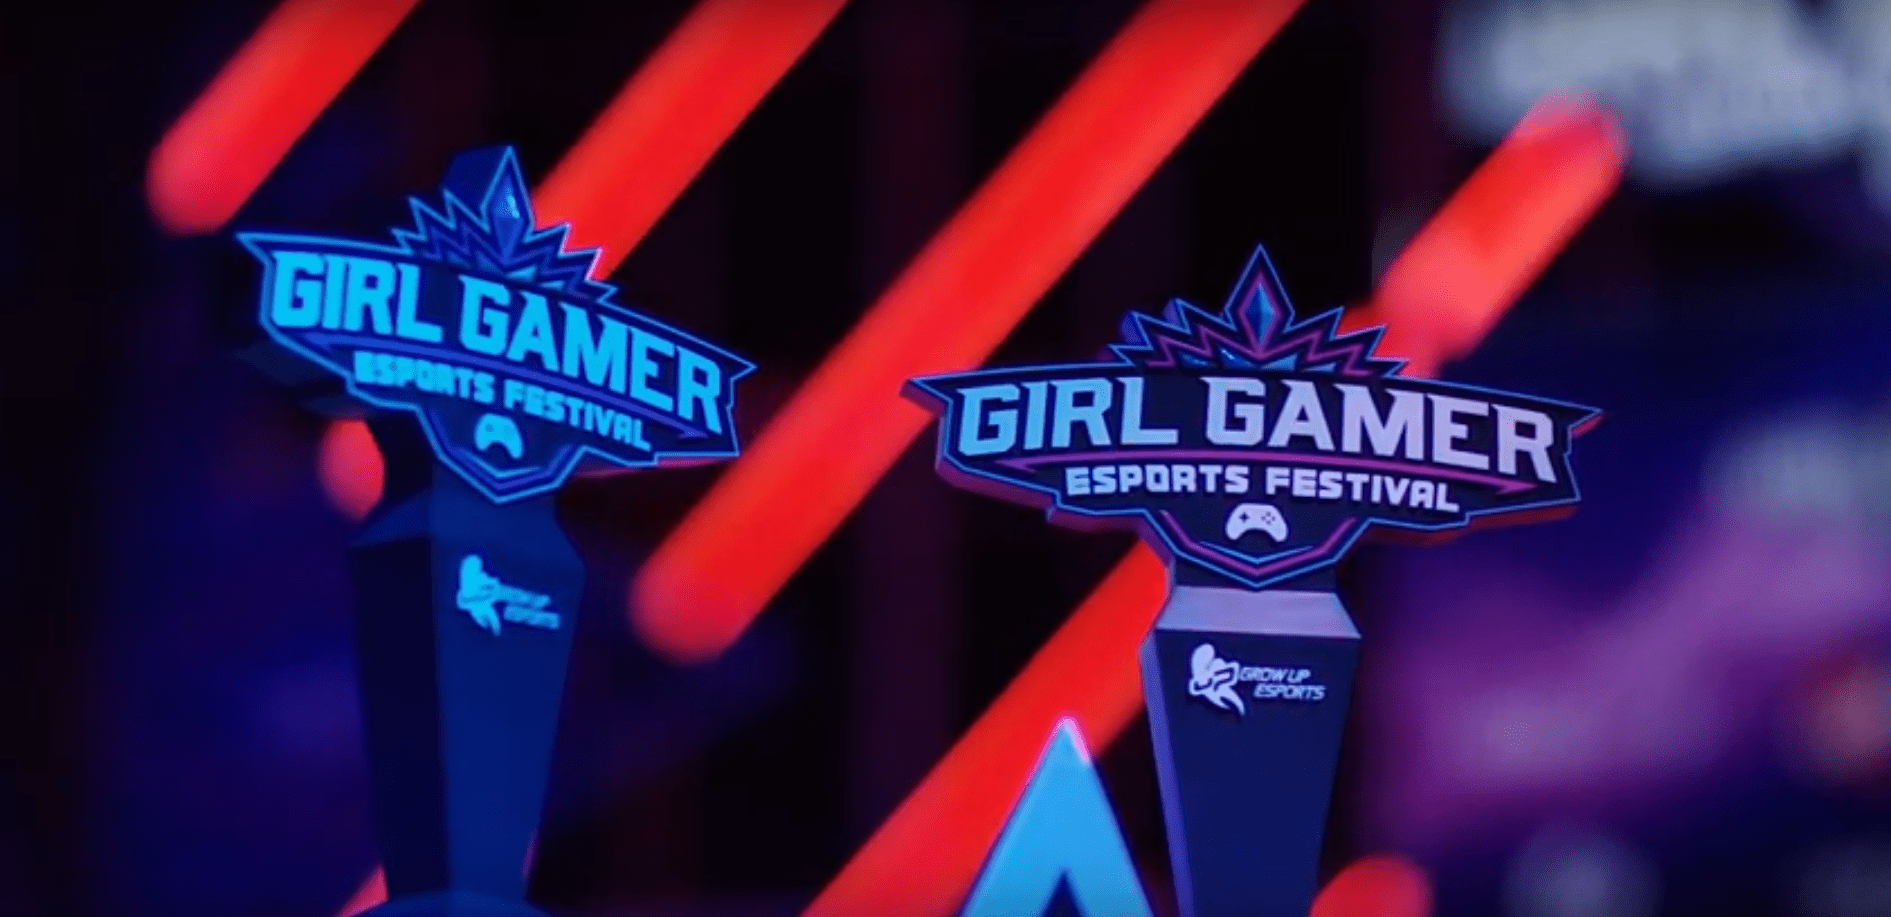 First All-Female Middle Eastern Team Is Forming. Will Compete In GIRLGAMER World Finals In Dubai